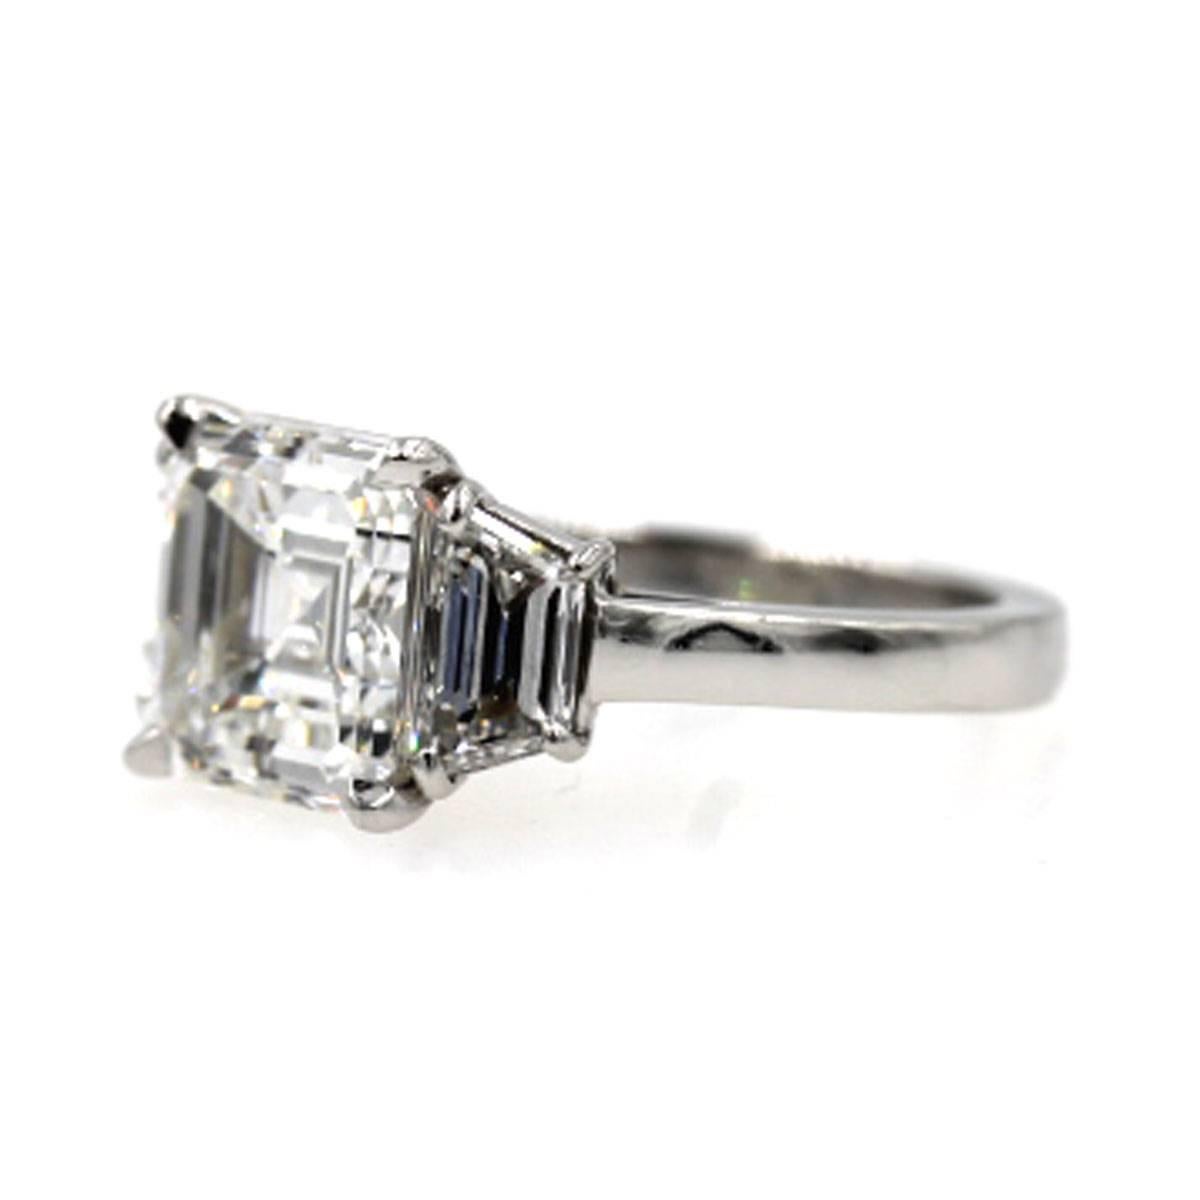 Gorgeous 3 diamond engagement ring by Cartier. The center diamond is a 3.17 carat Asscher cut graded F/SI1. The Diamond has a GIA certificate #14821675. Two side trapezoid shaped diamonds equal 1.00 carat total weight. The ring comes with original